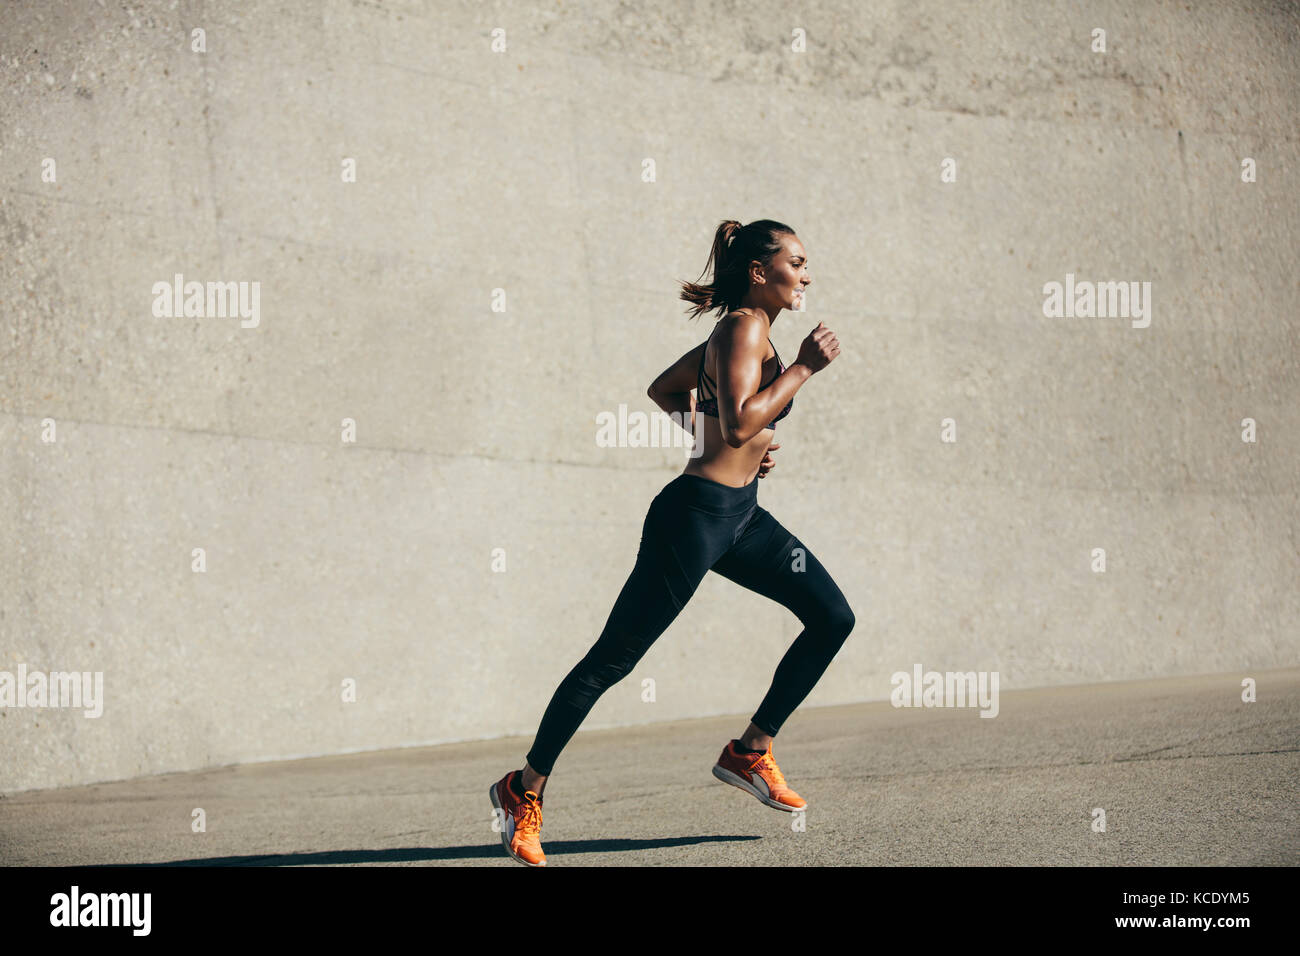 Healthy young woman running in morning. fitness model exercising in morning outdoors. Full length side view shot. Stock Photo